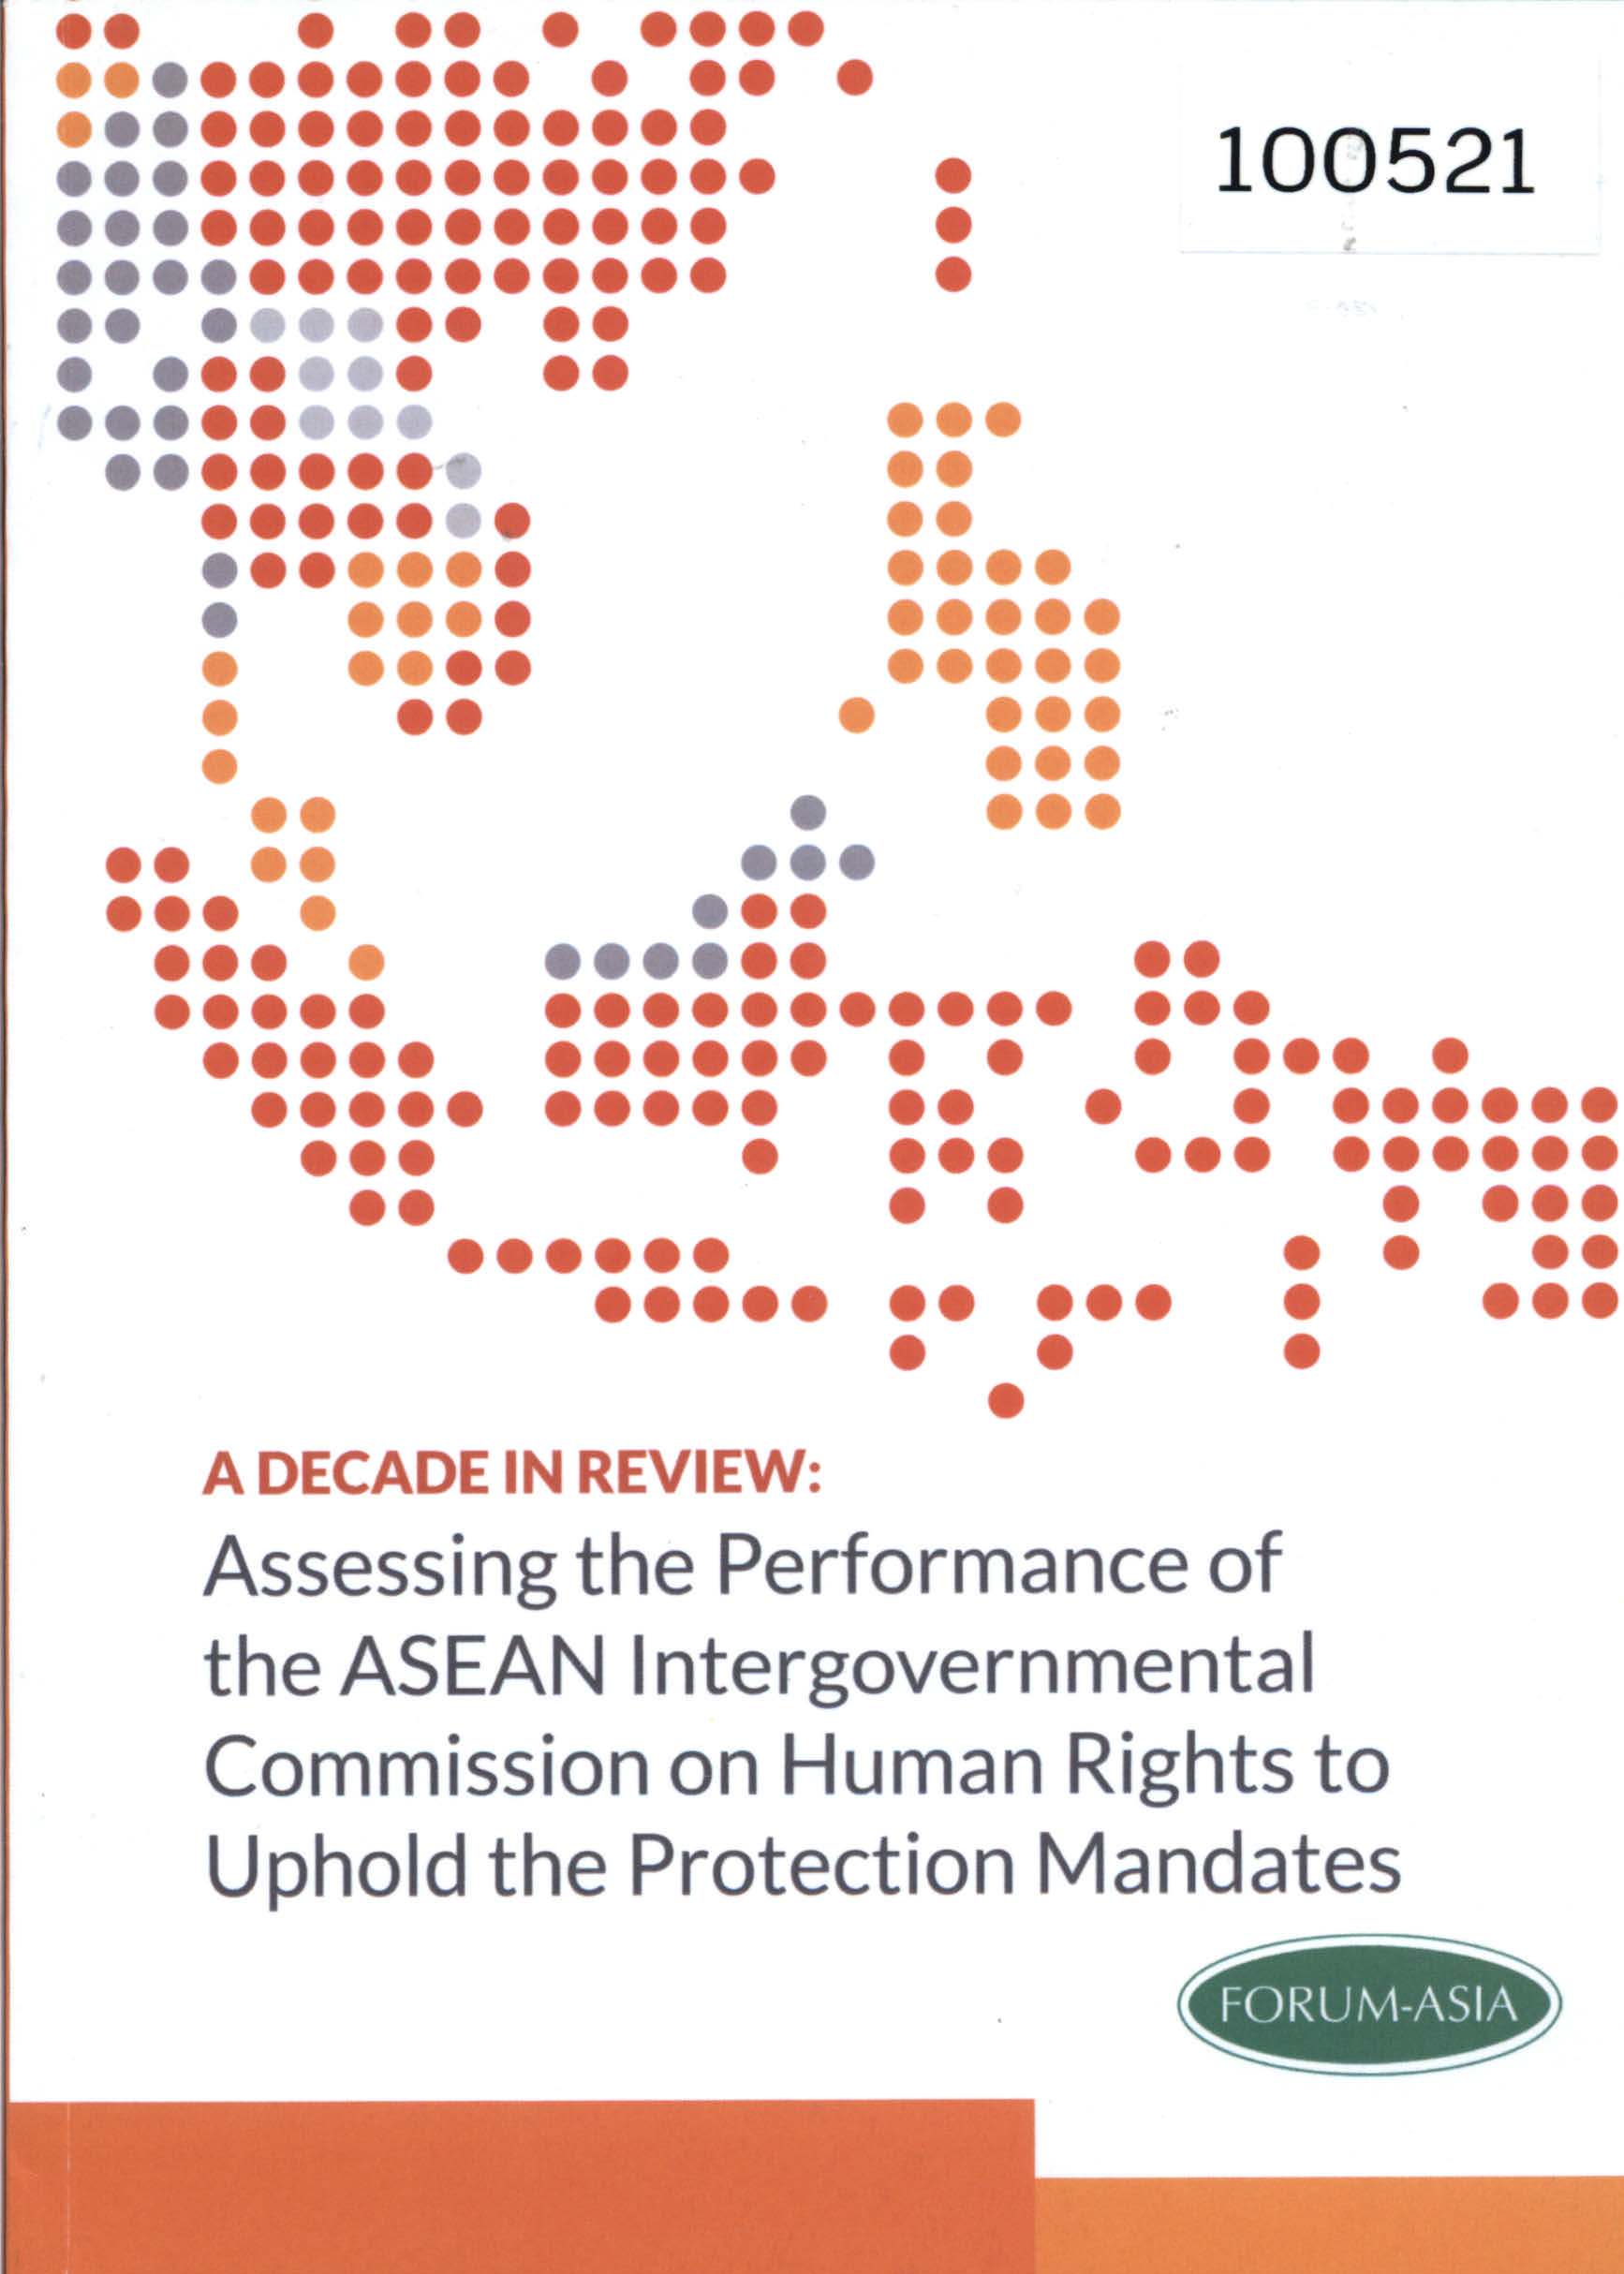 Assessing the Performance of the ASEAN Intergovernmental Commission on Human Rights to Uphold the Protection Mandates